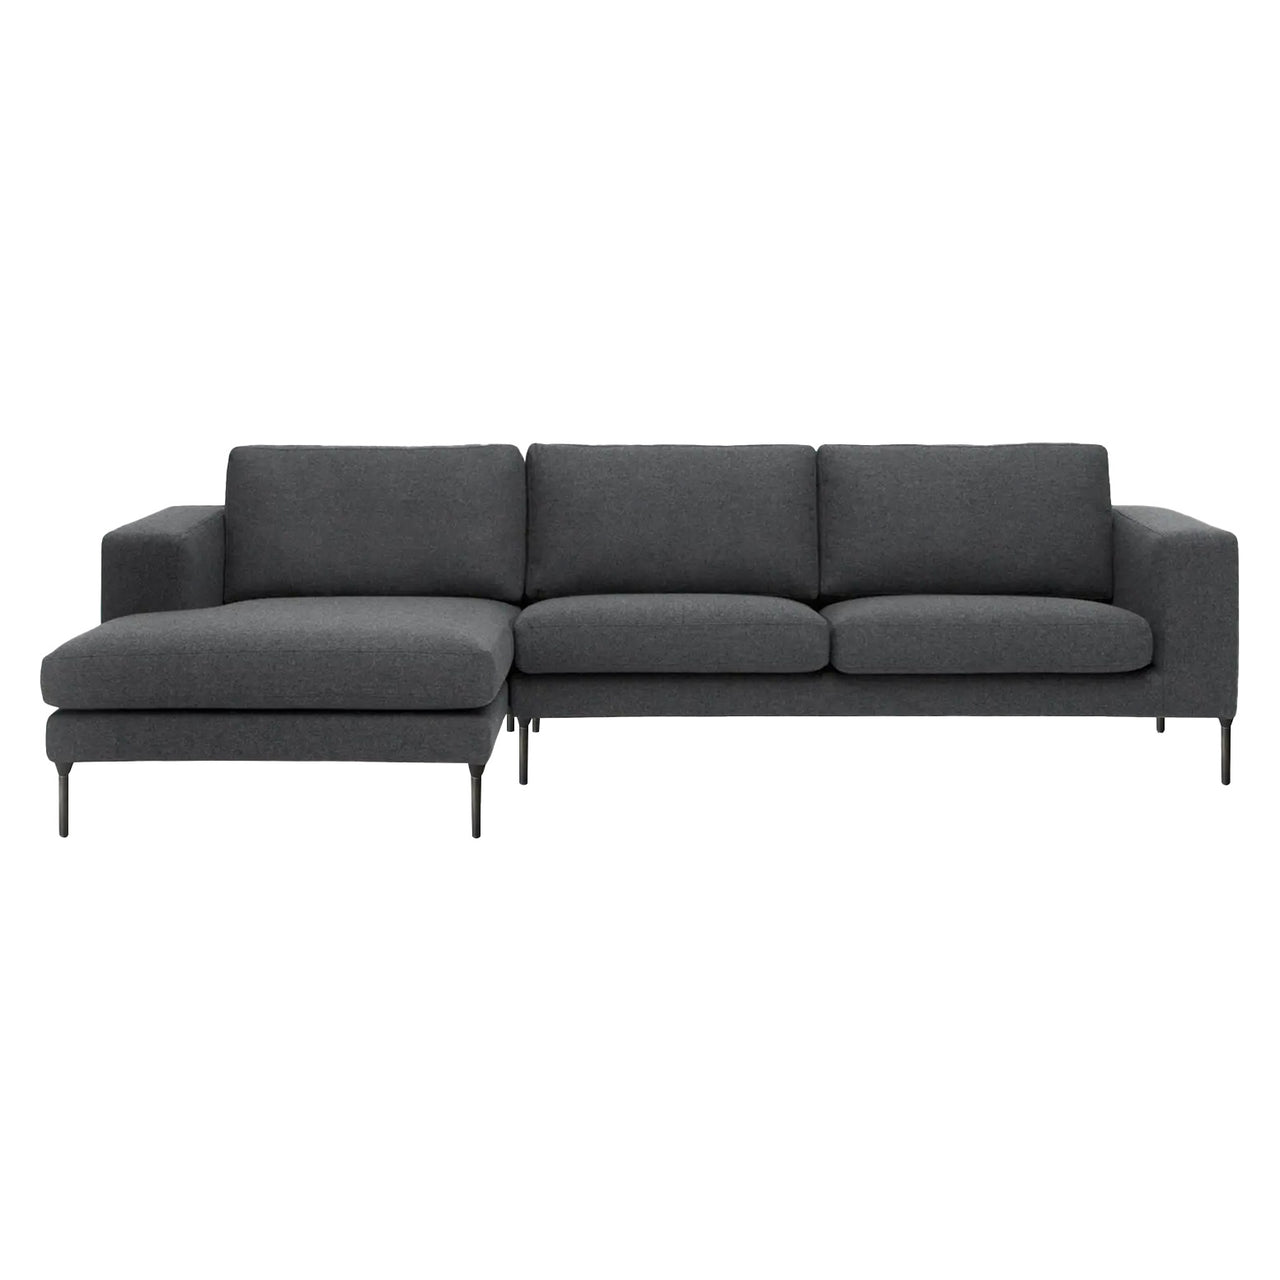 Neo Sectional Sofa: Right + Black Nickel